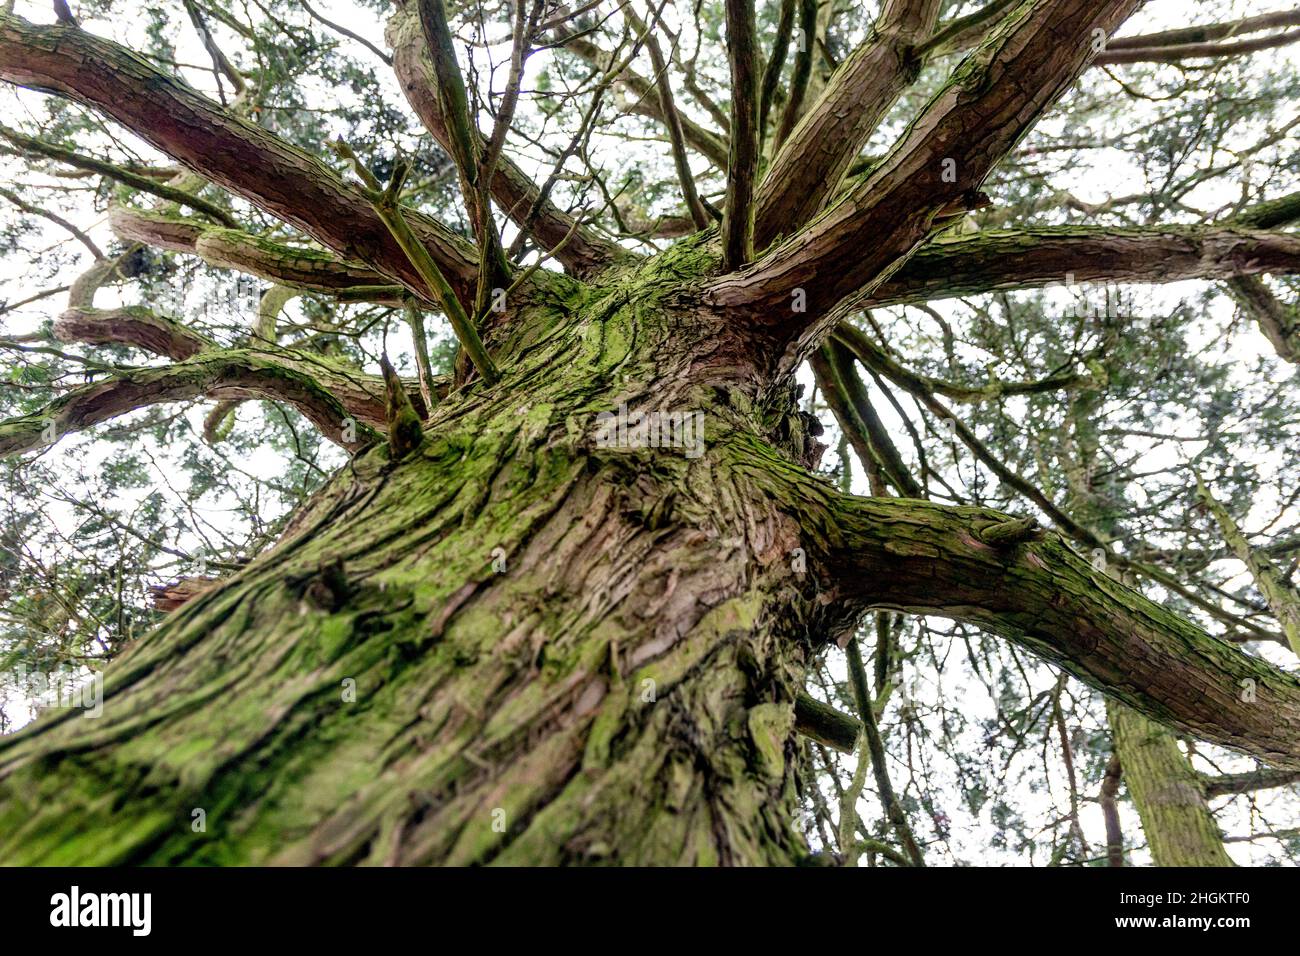 Looking up into a tree, with its rough patterned bark, and its many branches Stock Photo